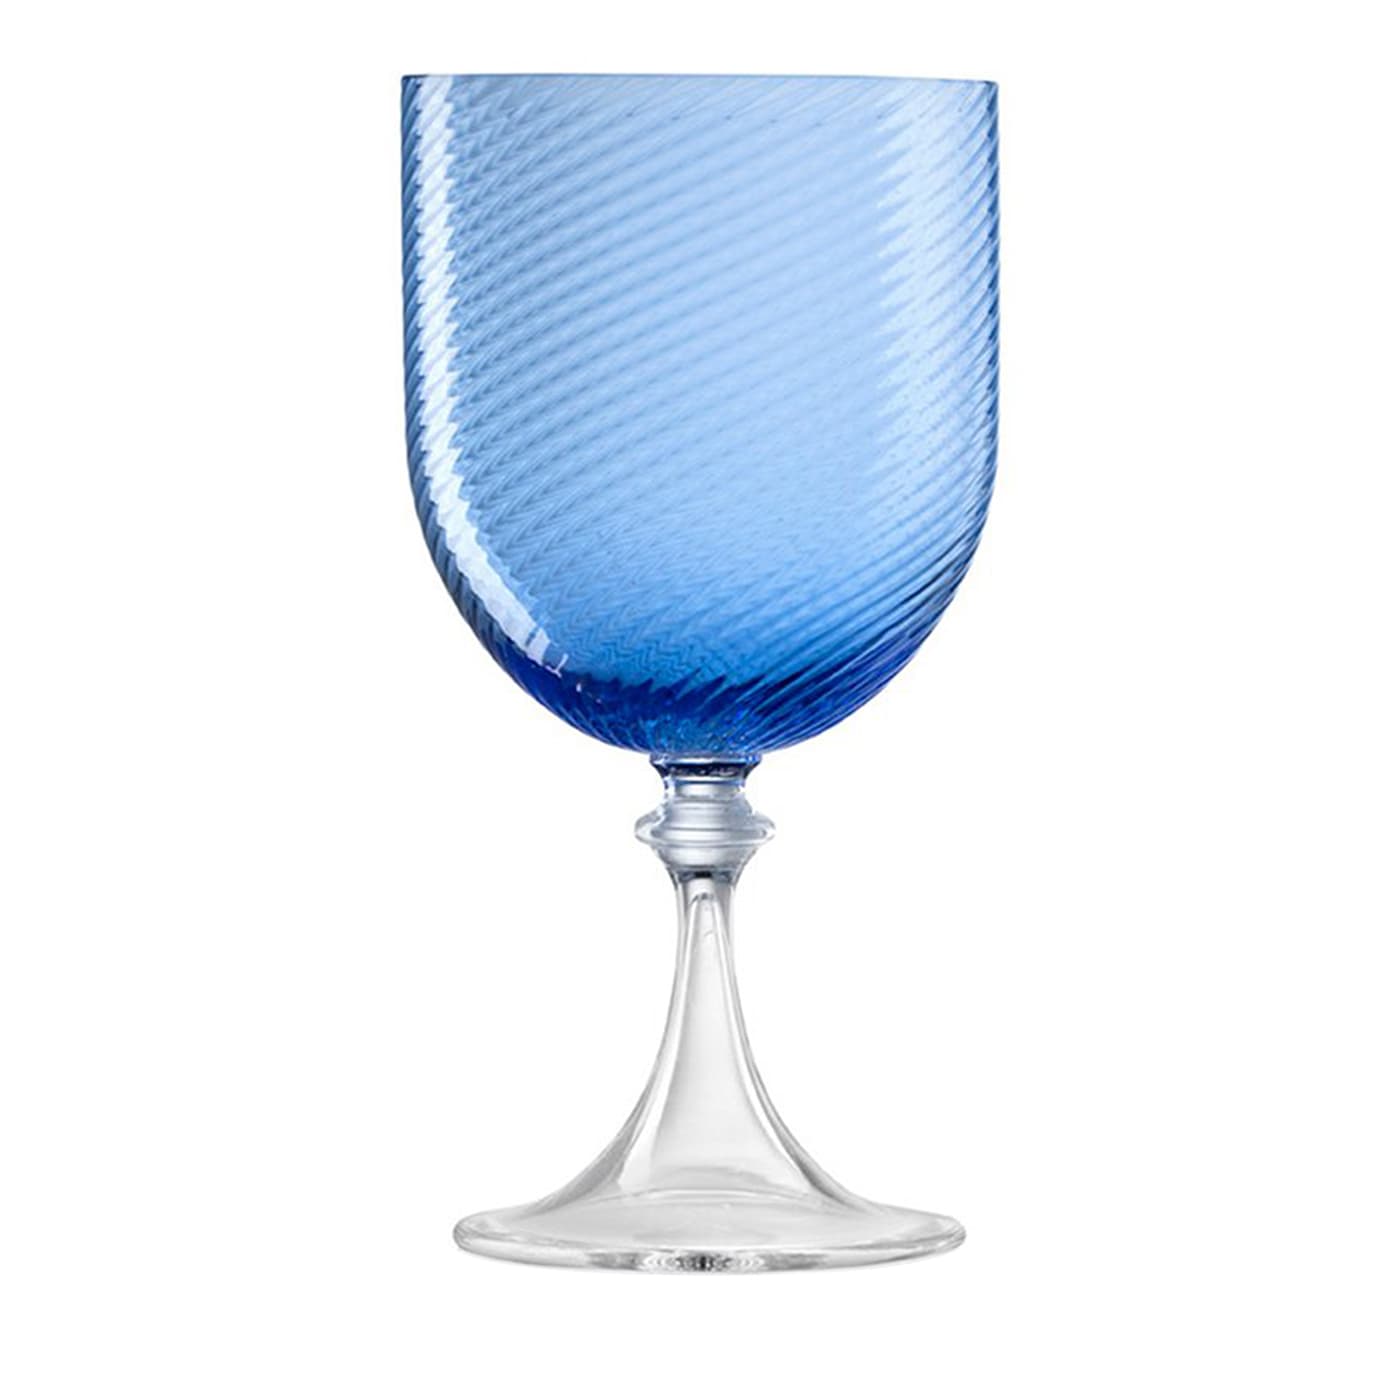 SET OF 6 BLUE MURANO WATER GLASSES - Vio's Cooking